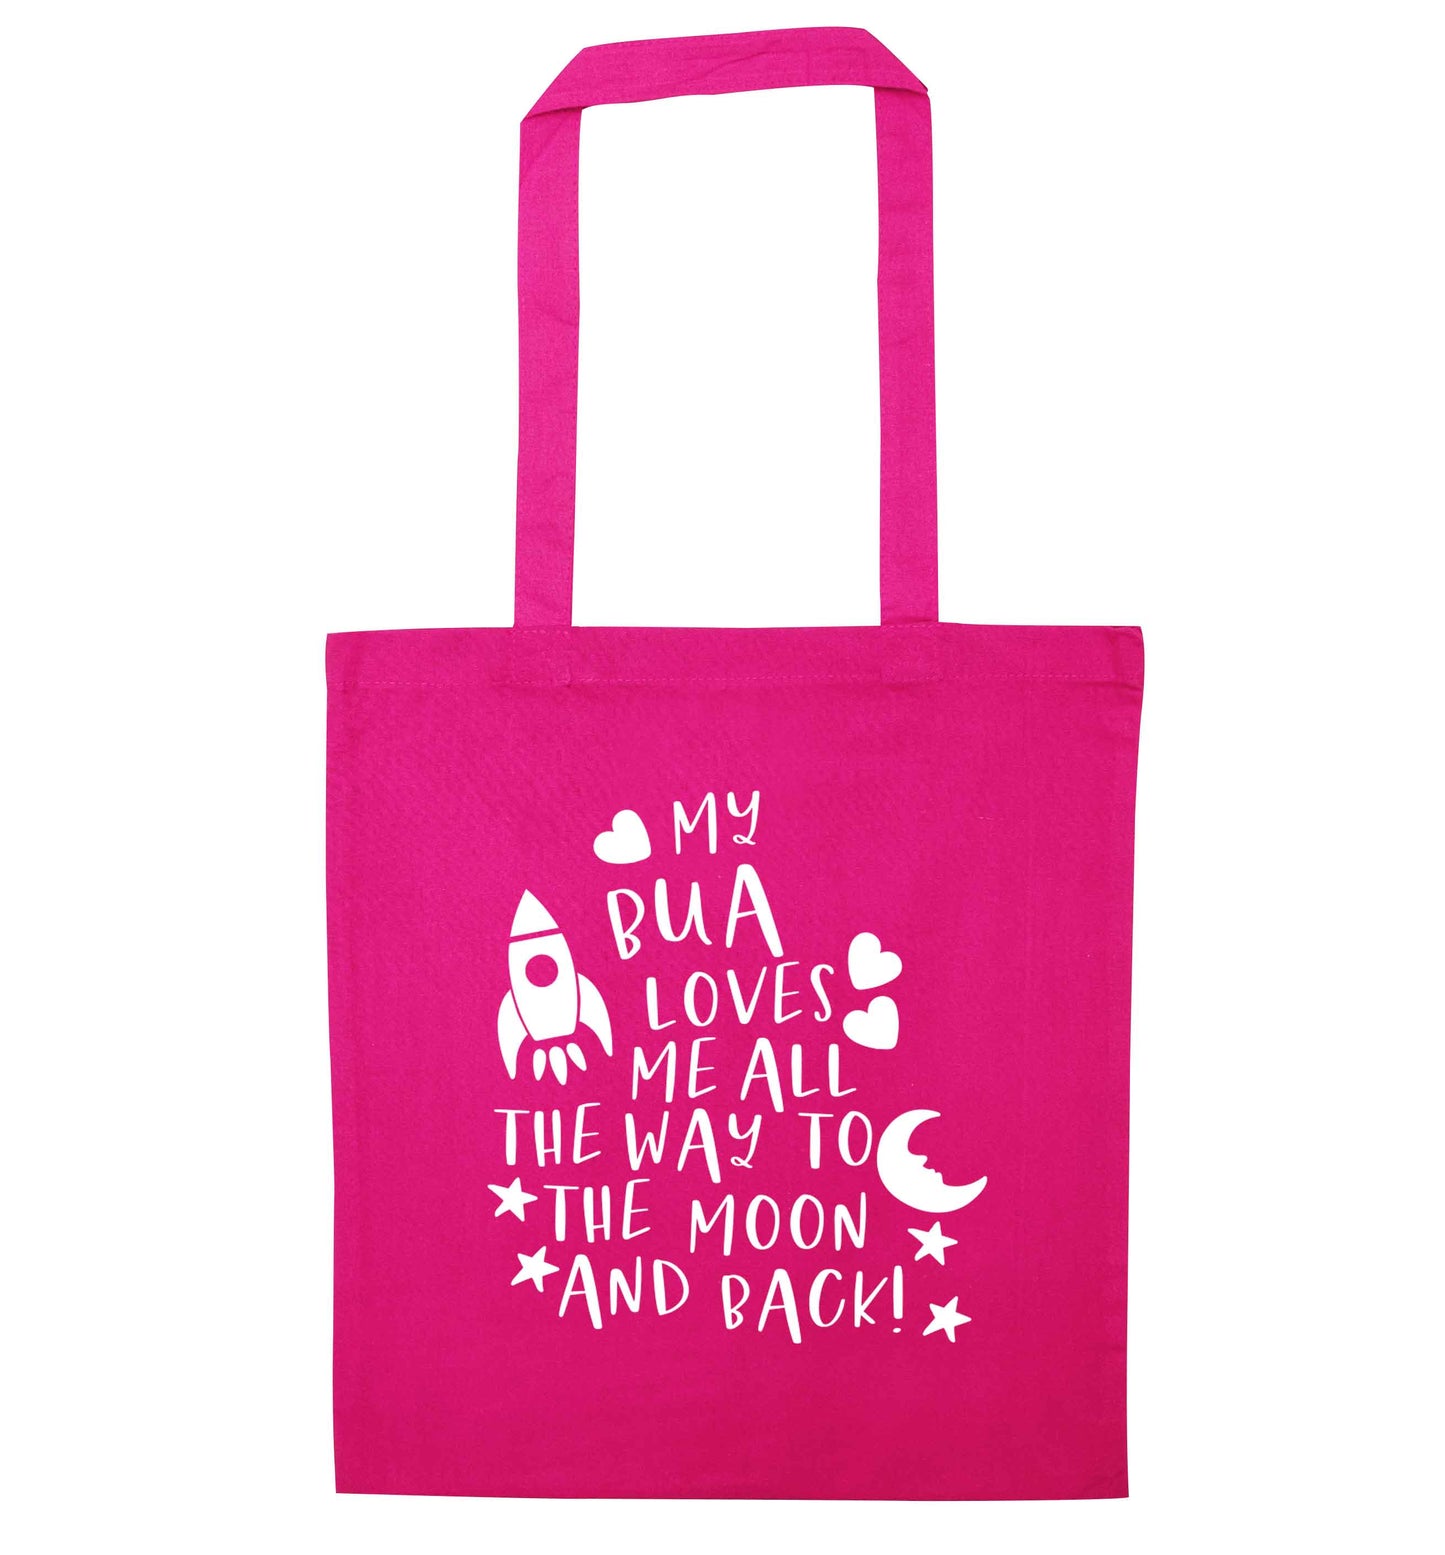 My bua loves me all they way to the moon and back pink tote bag